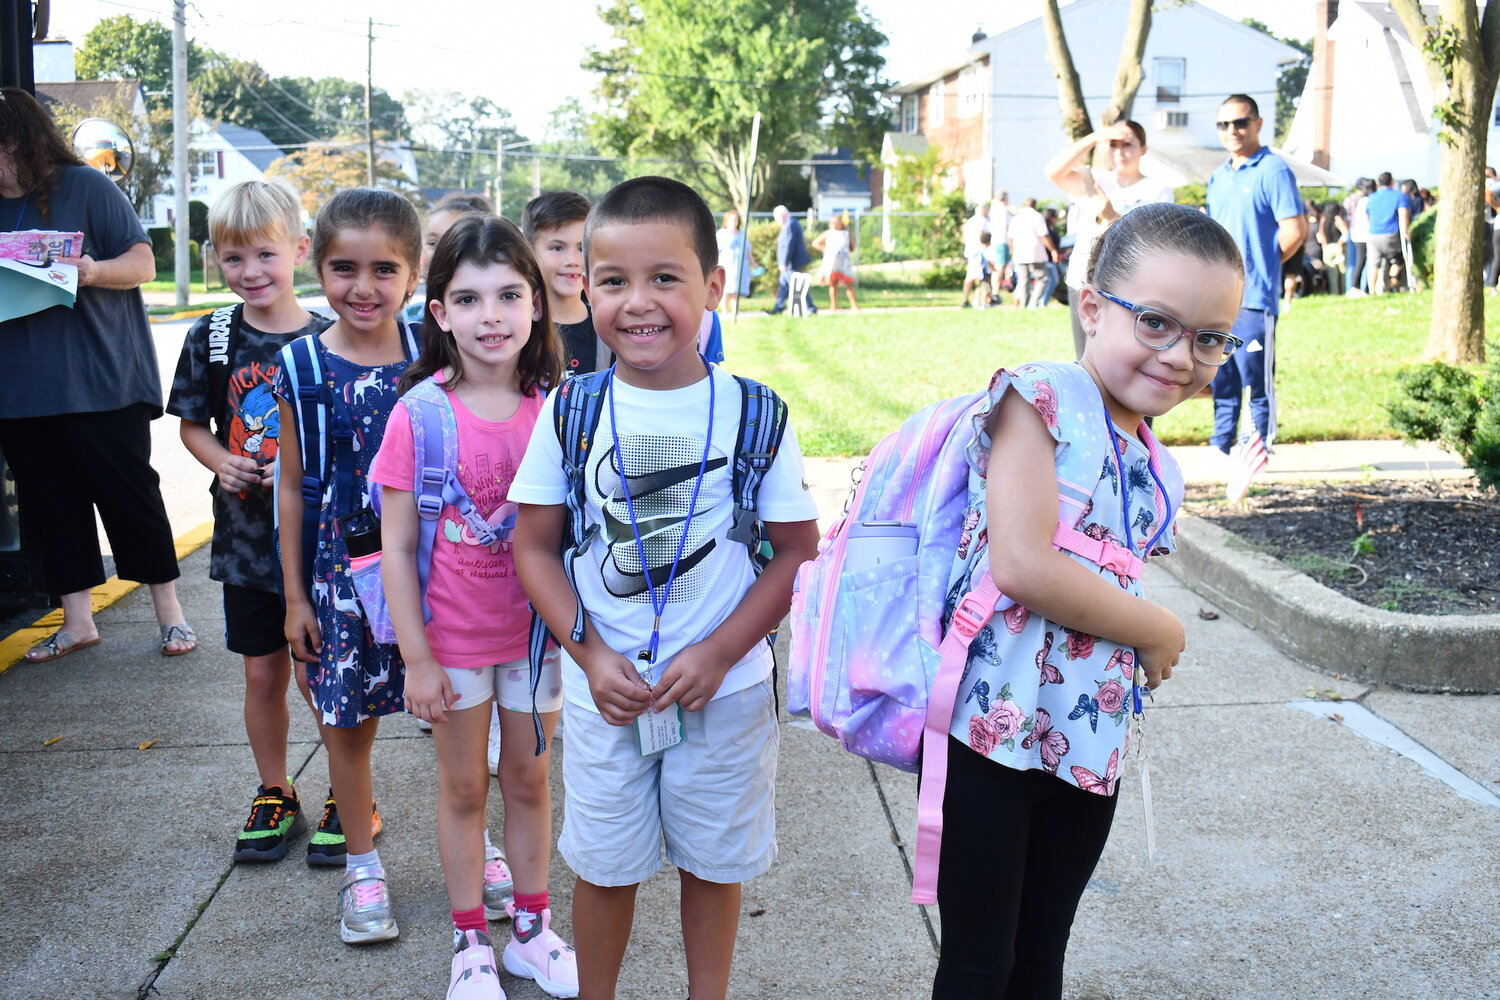 Downing students are ready for the new school year.